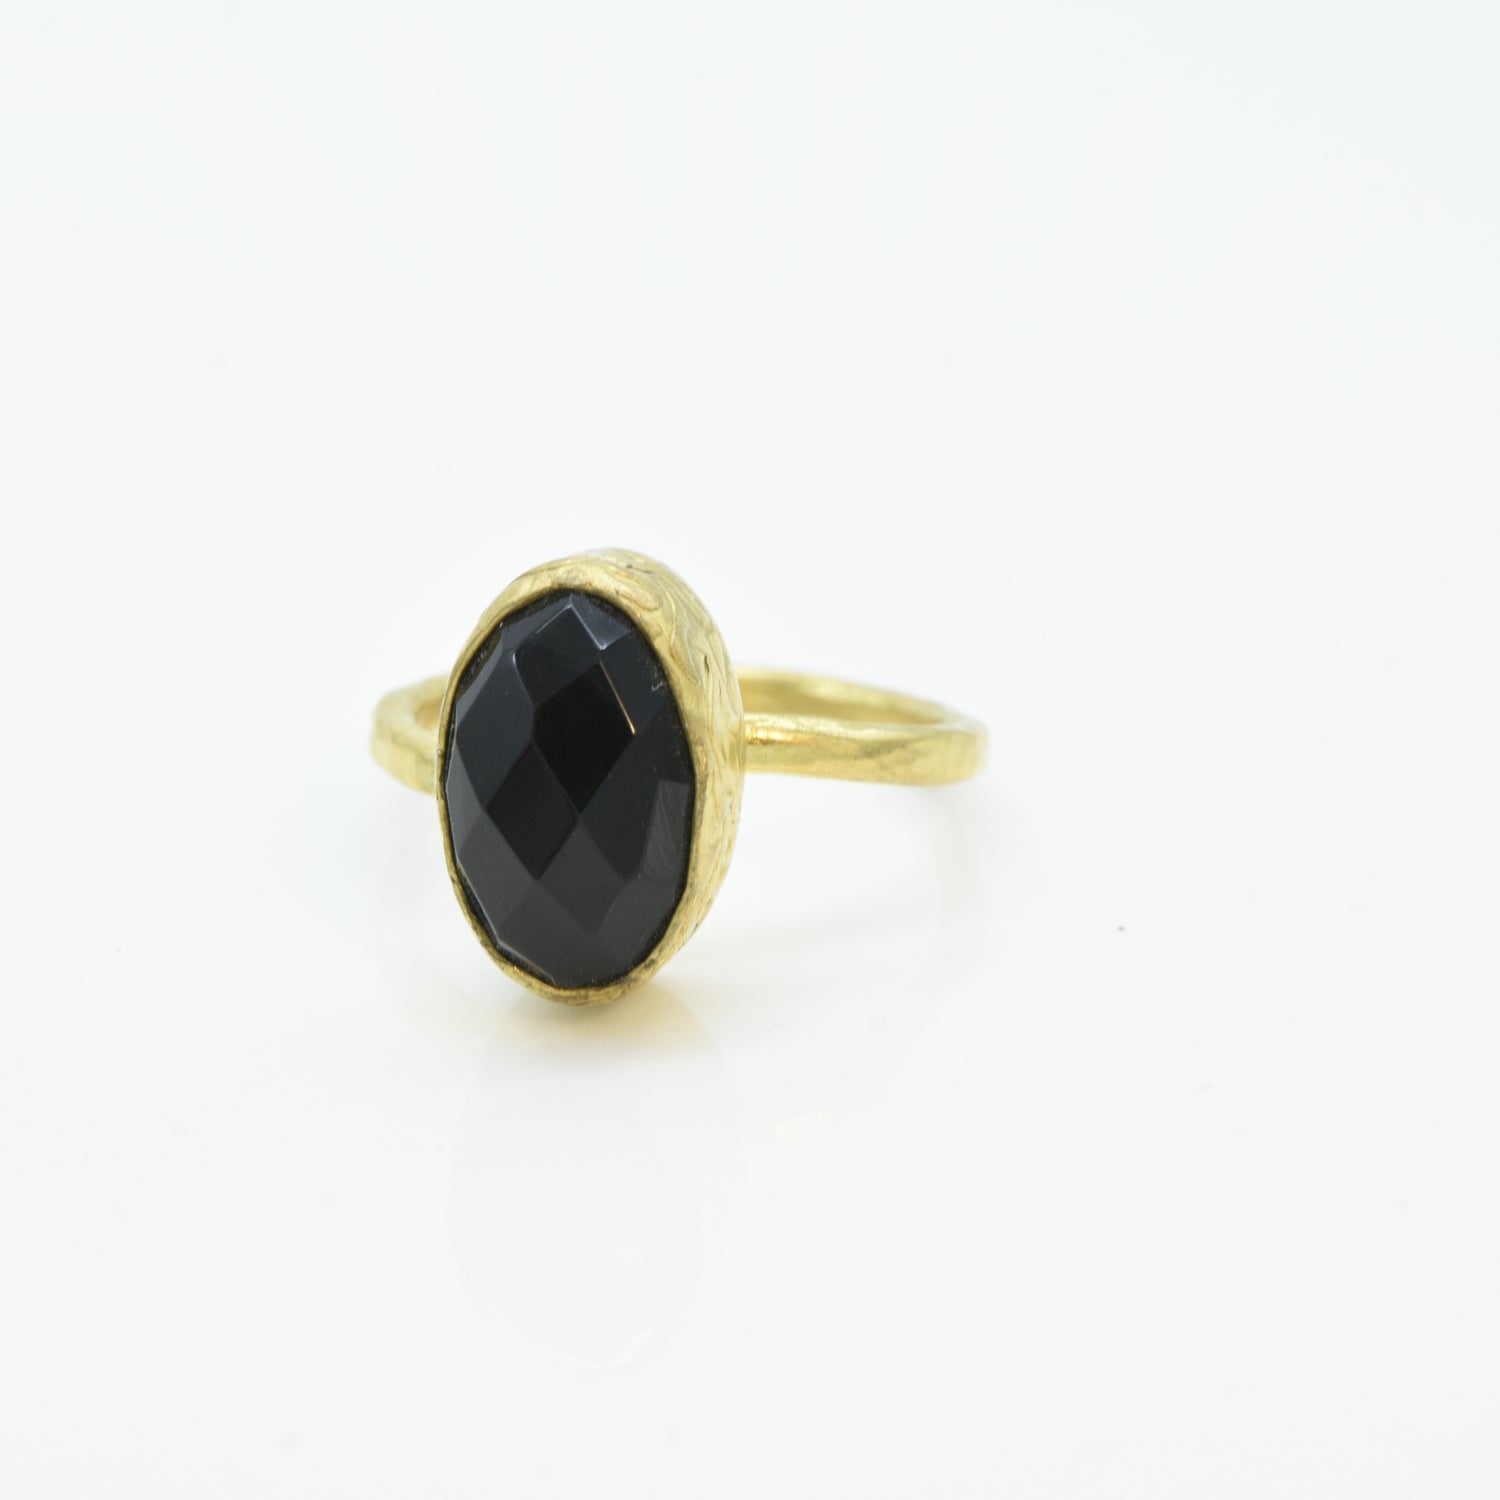 Aylas Onyx adjustable ring - 21ct Gold plated brass - Handmade in Ottoman Style by Artisan